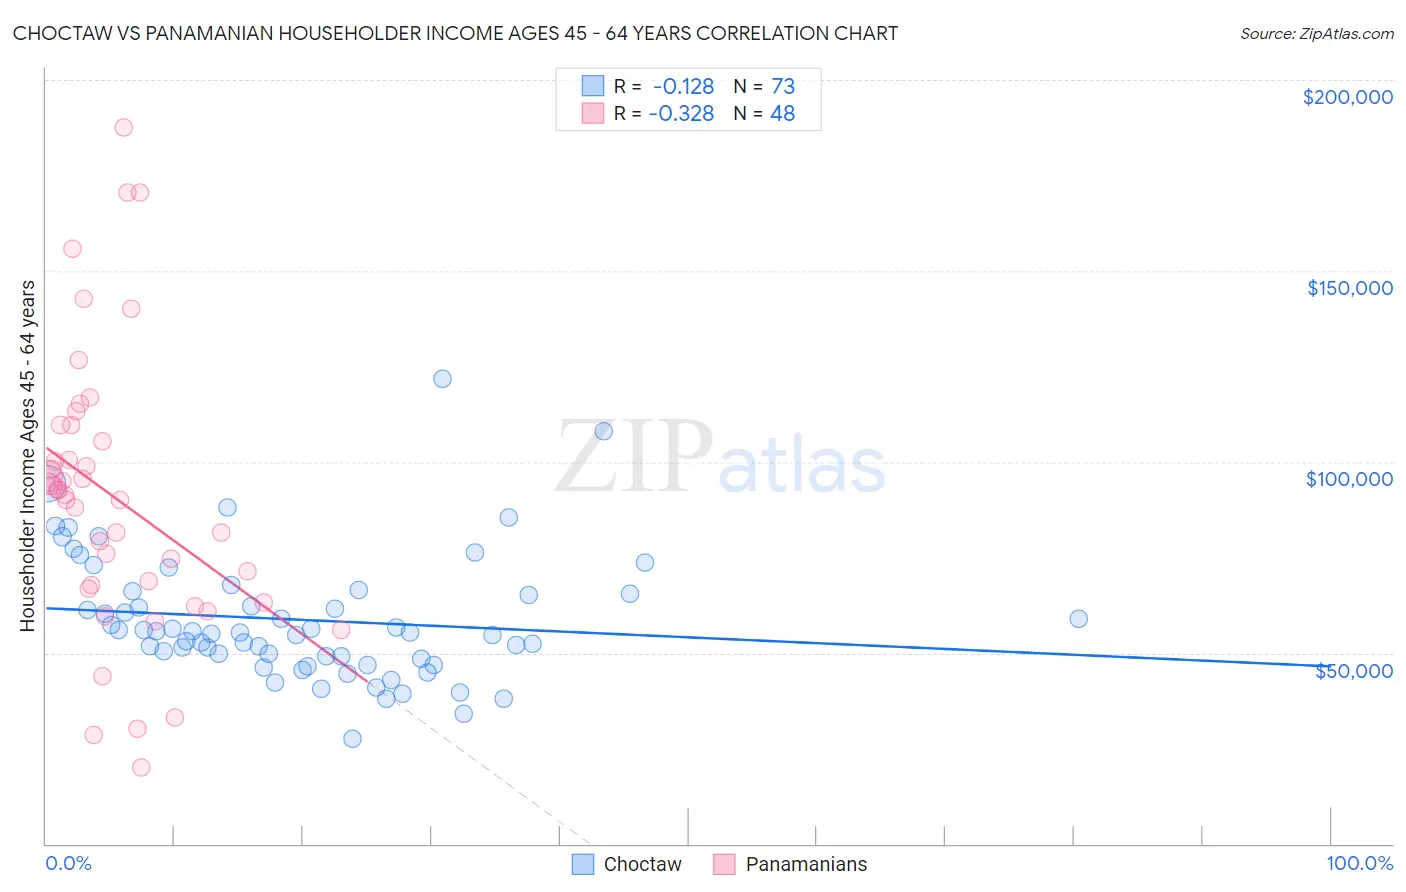 Choctaw vs Panamanian Householder Income Ages 45 - 64 years